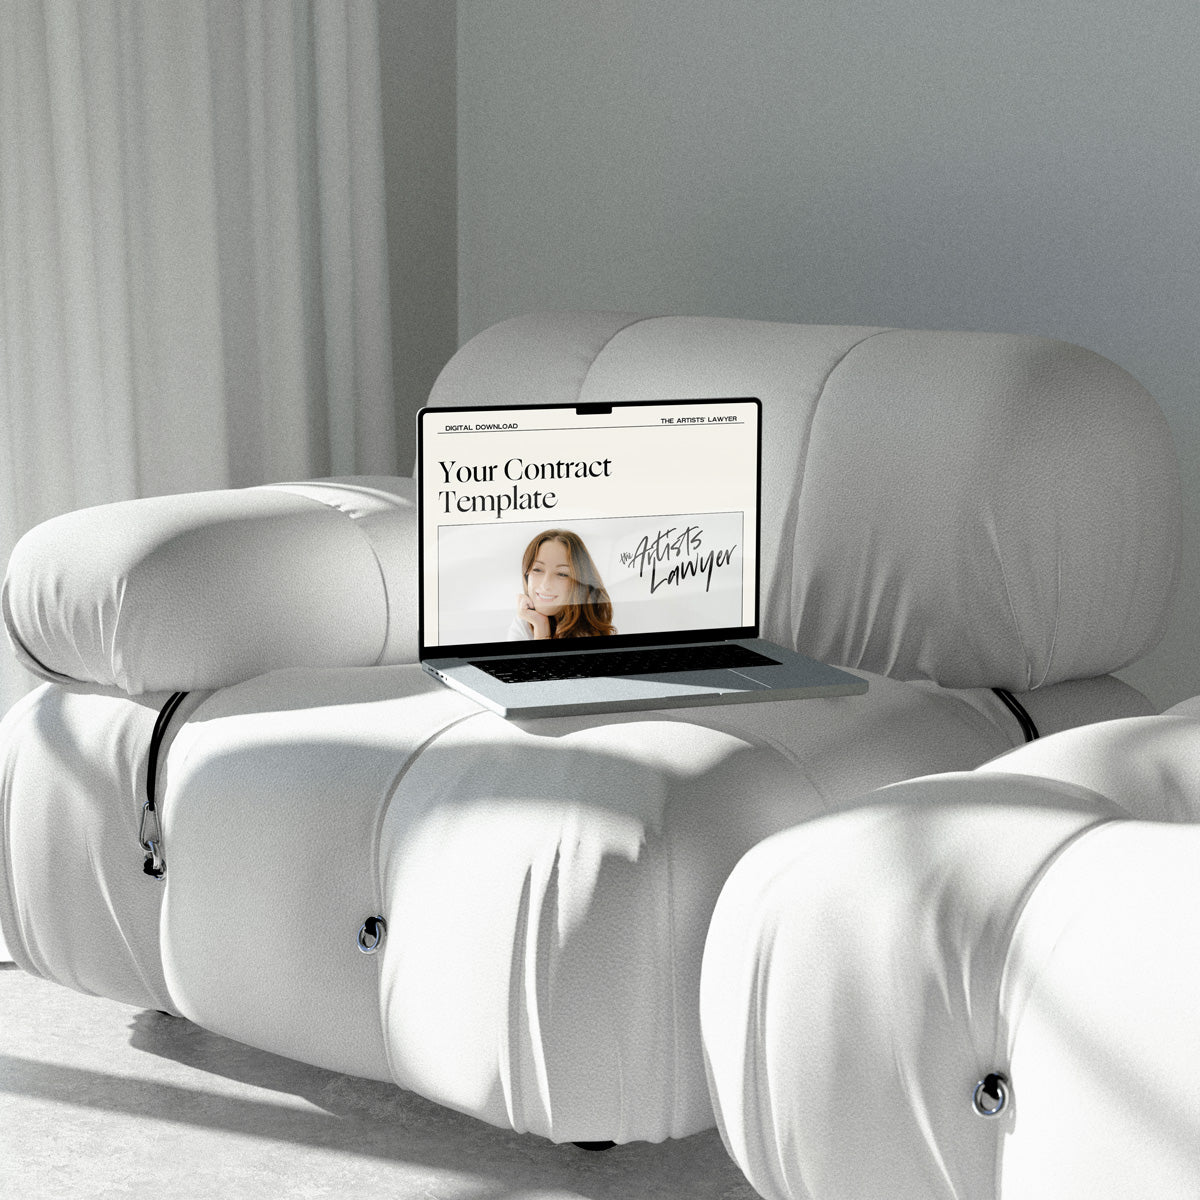 Laptop on white couch, showcasing an artist contract template.